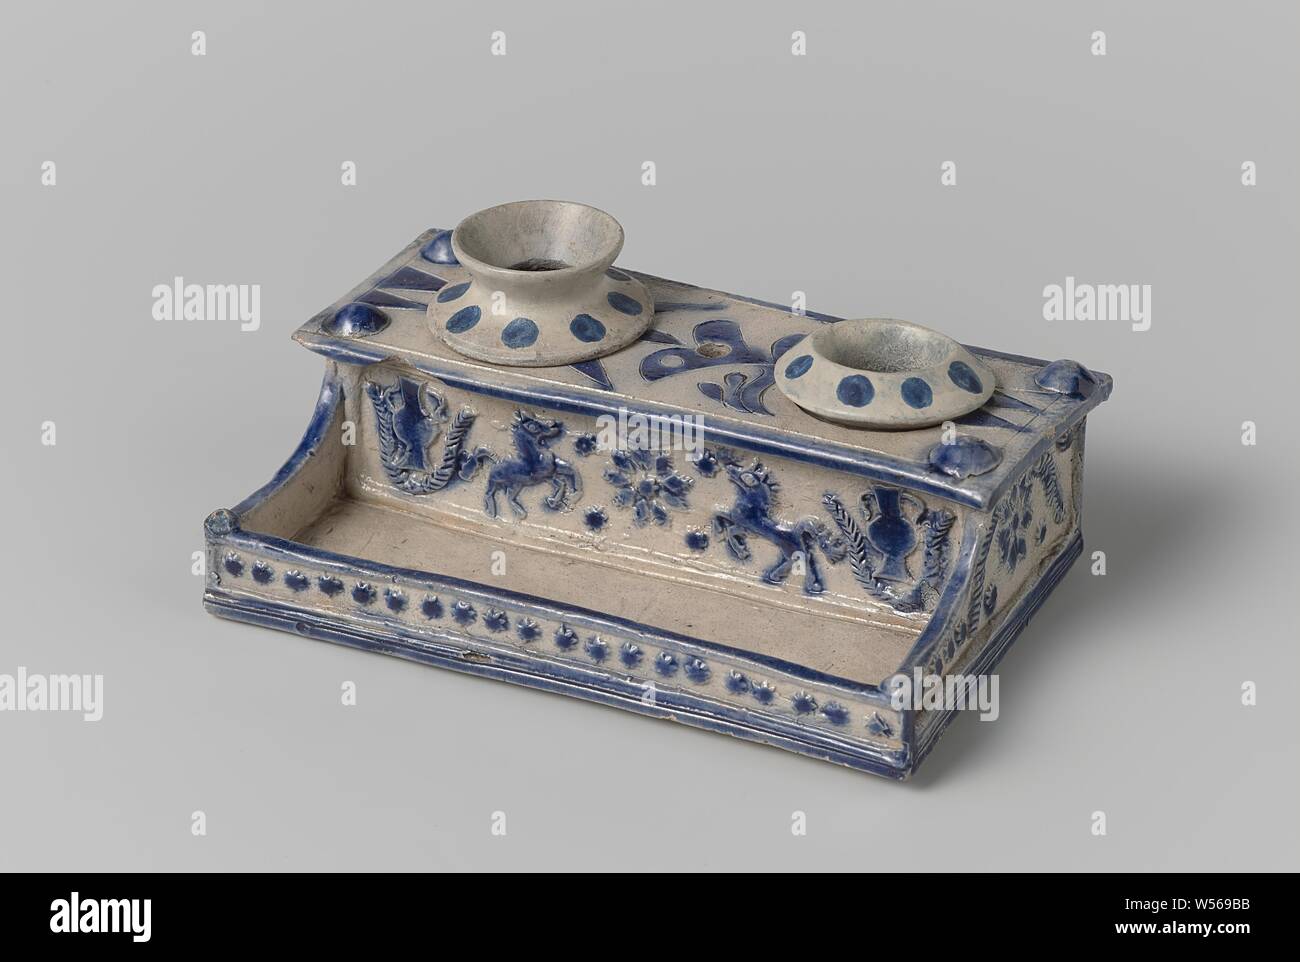 https://c8.alamy.com/comp/W569BB/ink-stand-with-horses-vases-and-flowers-ink-set-of-stoneware-with-a-pen-tray-and-two-holders-for-the-inkwell-and-the-sand-shaker-partially-covered-with-cobalt-blue-the-front-and-back-with-a-relief-decoration-of-a-printed-and-superimposed-flower-flanked-by-prancing-horses-and-two-piece-vases-surrounded-by-a-festoon-an-incised-stylized-flowering-plant-on-the-top-a-modeled-rivet-on-each-corner-westerwald-anonymous-westerwald-c-1750-c-1799-stoneware-glaze-cobalt-mineral-vitrification-h-43-cm-w-142-cm-d-9-cm-W569BB.jpg